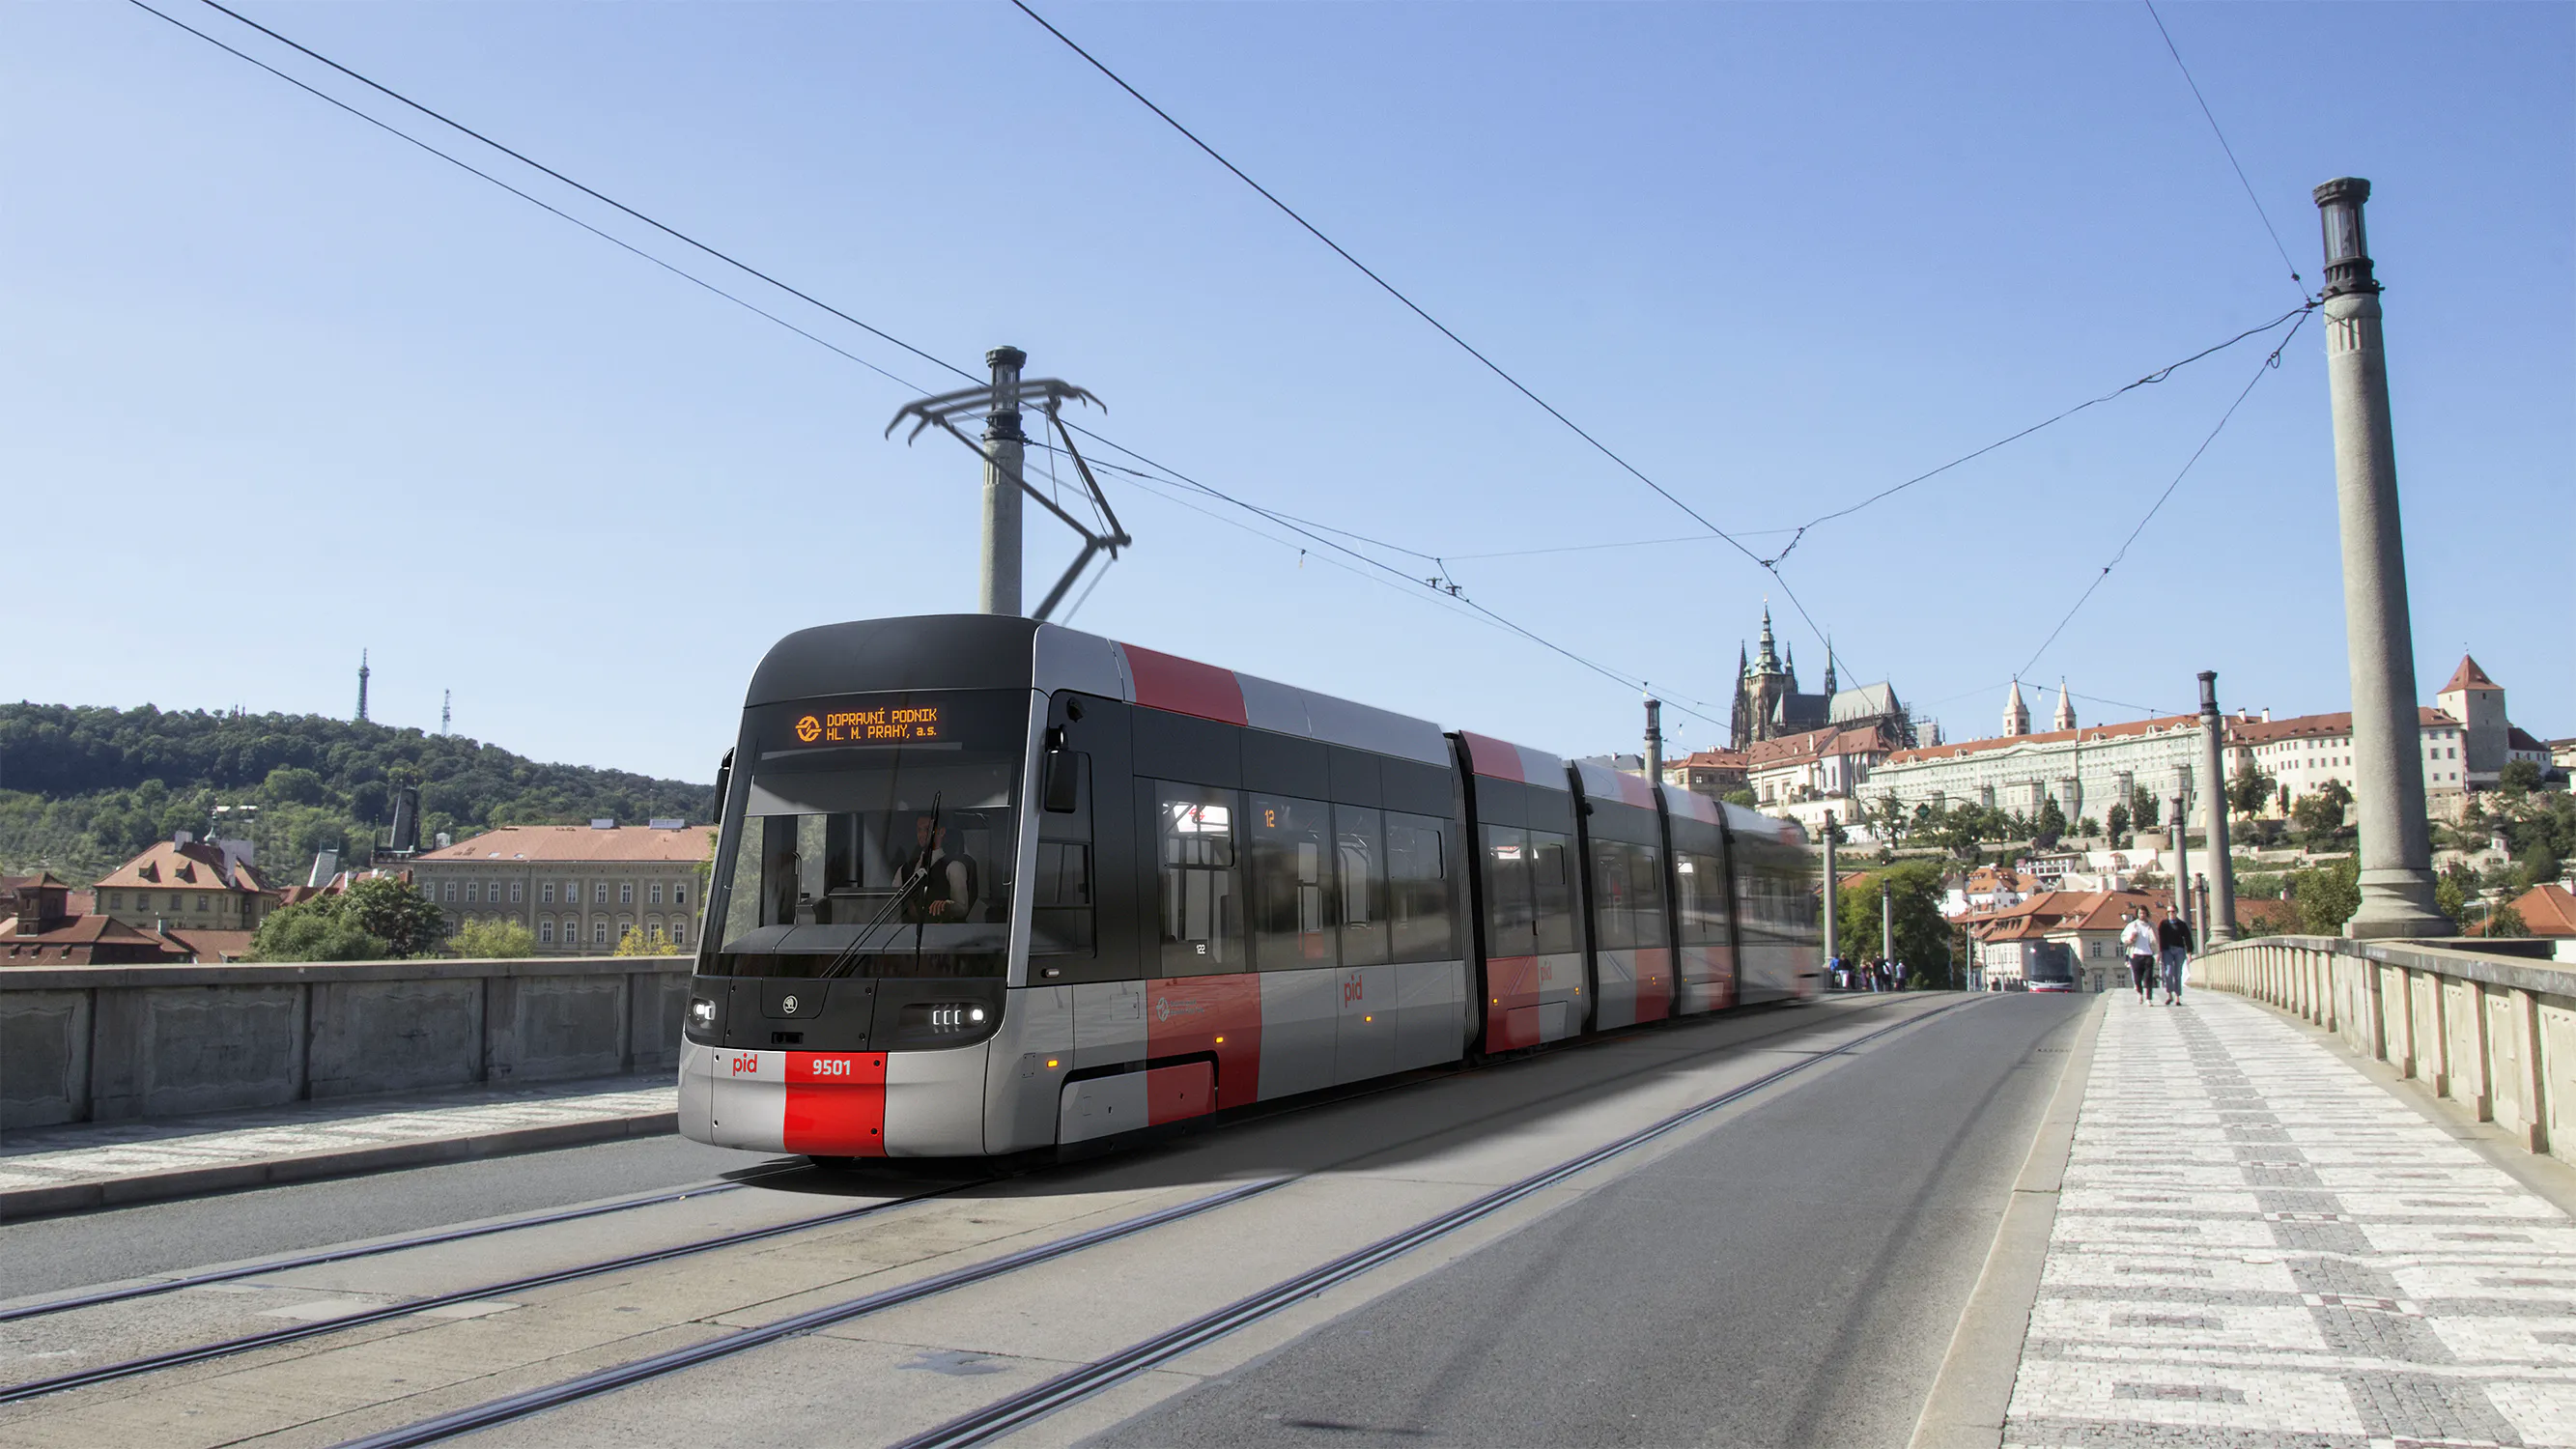 The rendering of the future tram for Prague